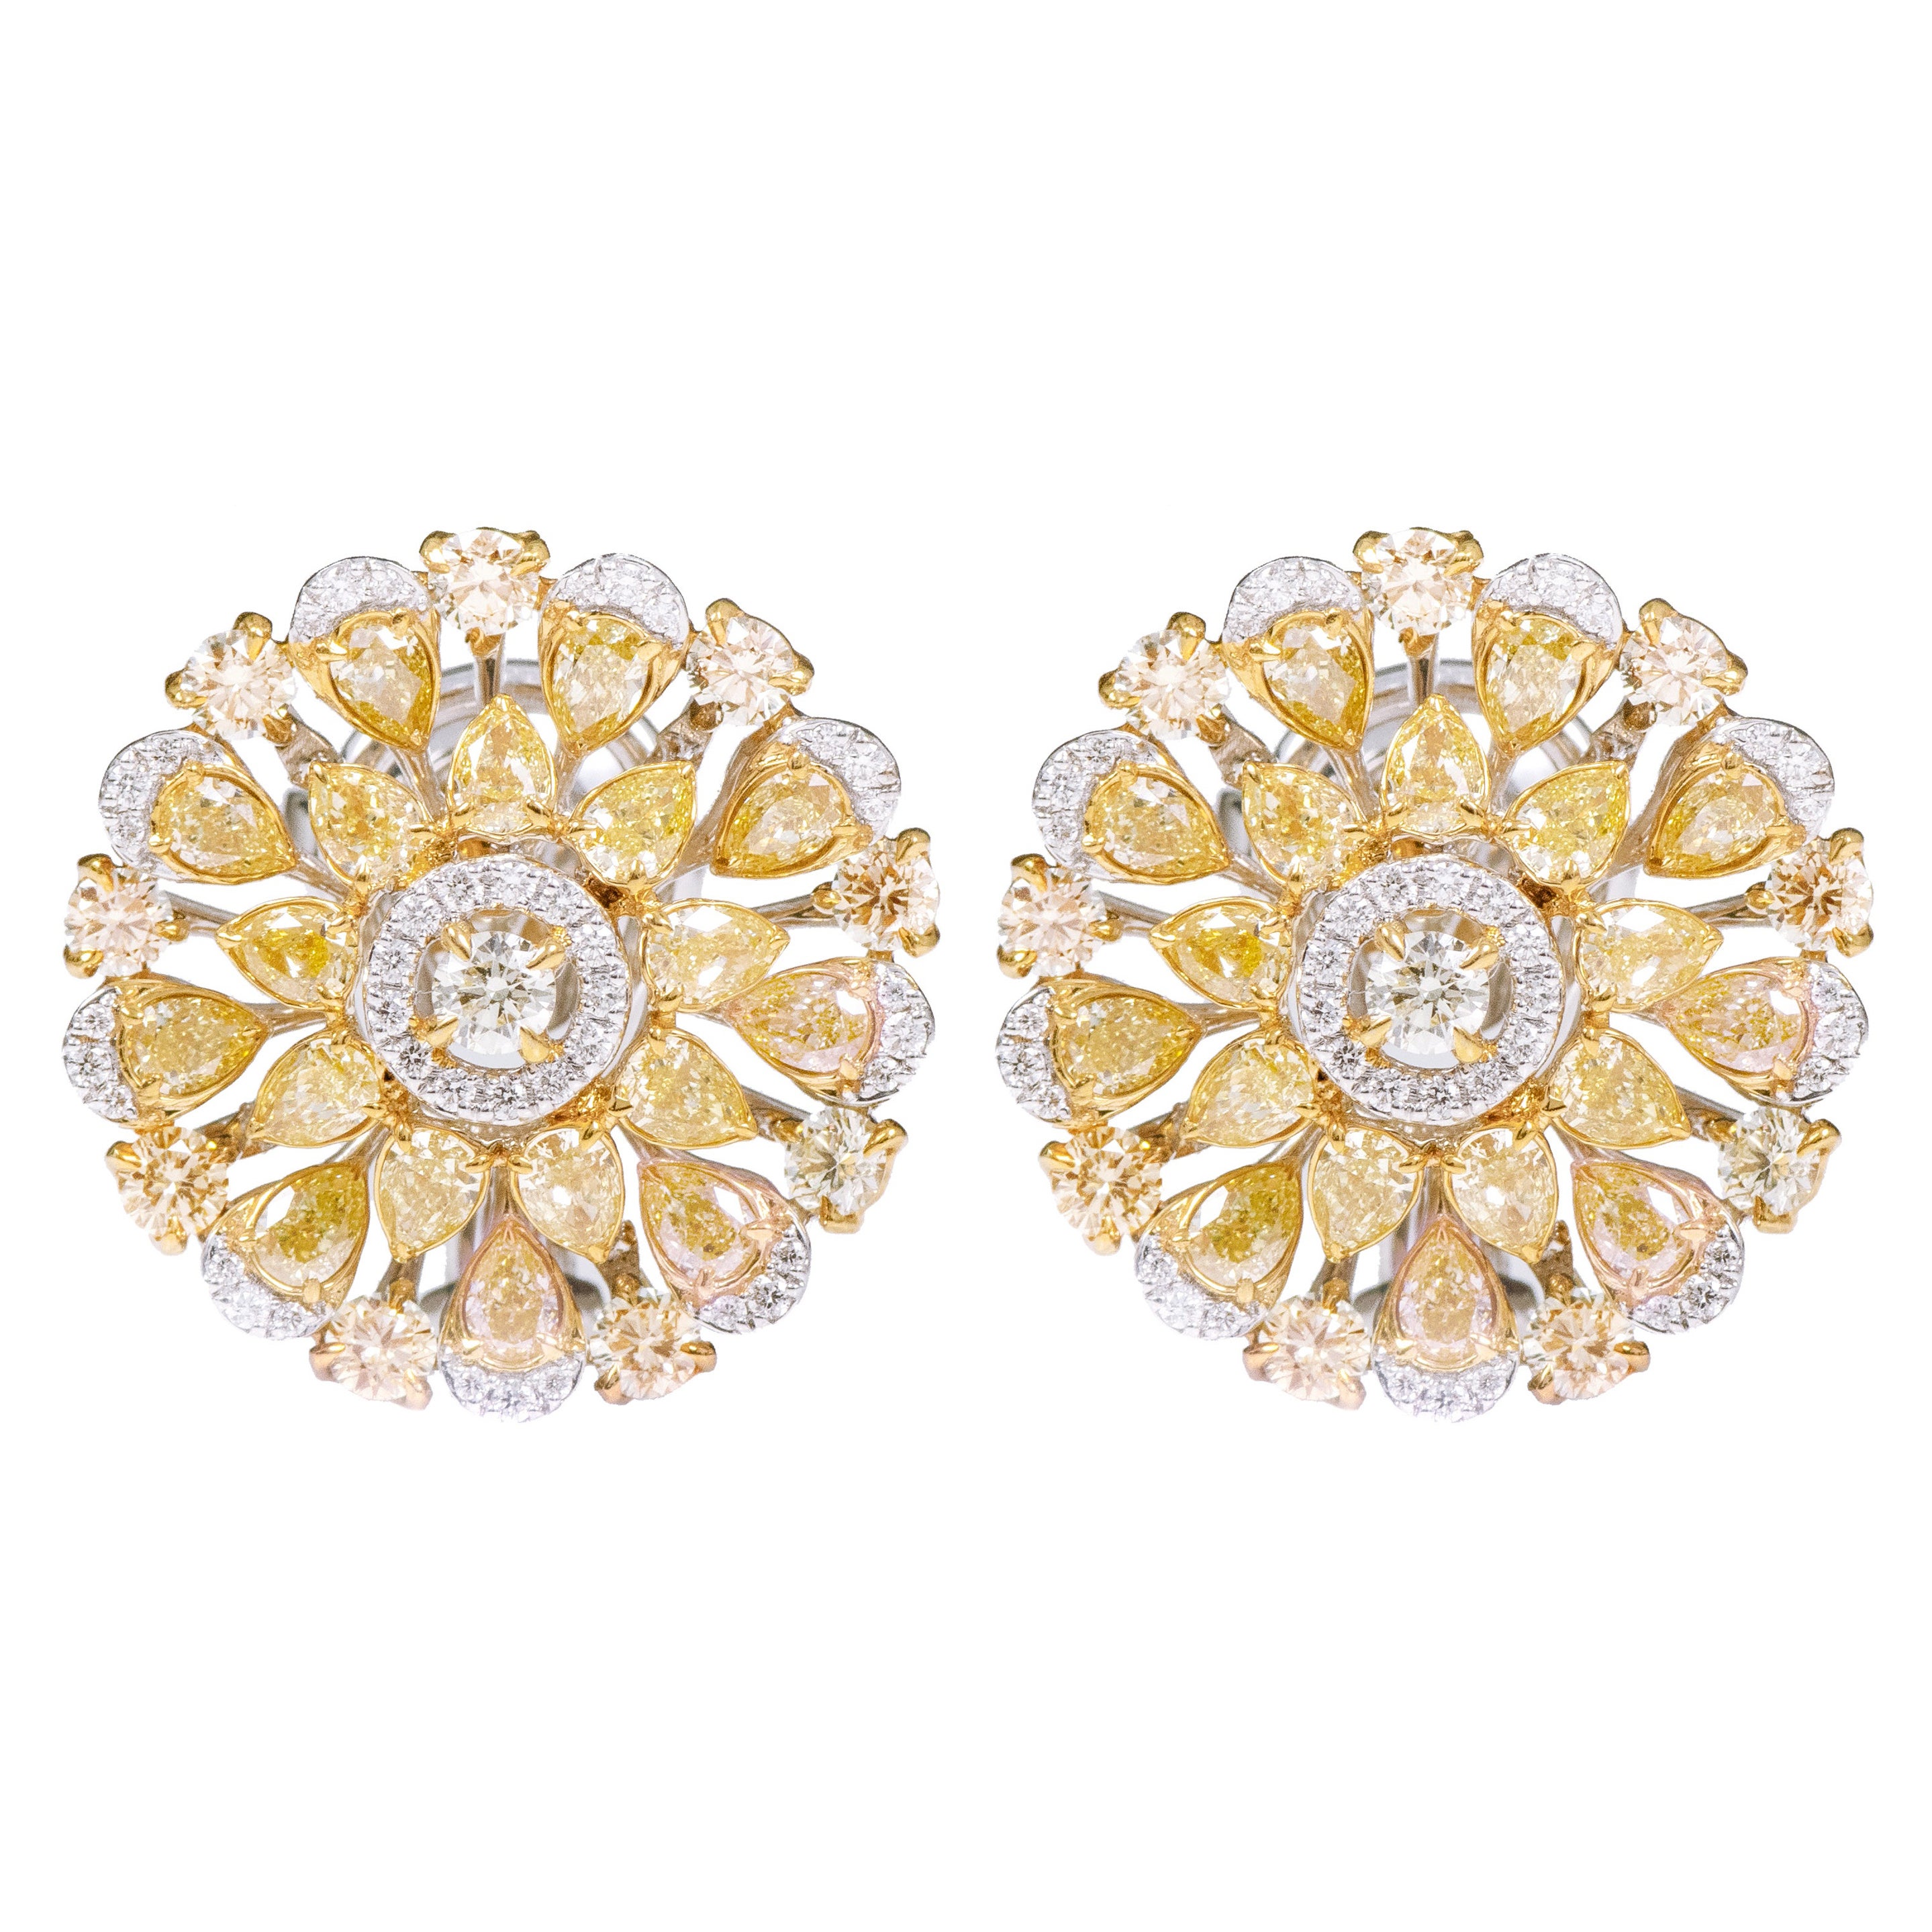 18 Karat Gold 5.69 Carat Fancy Yellow and White Diamond Solitaire Stud Earrings For Sale